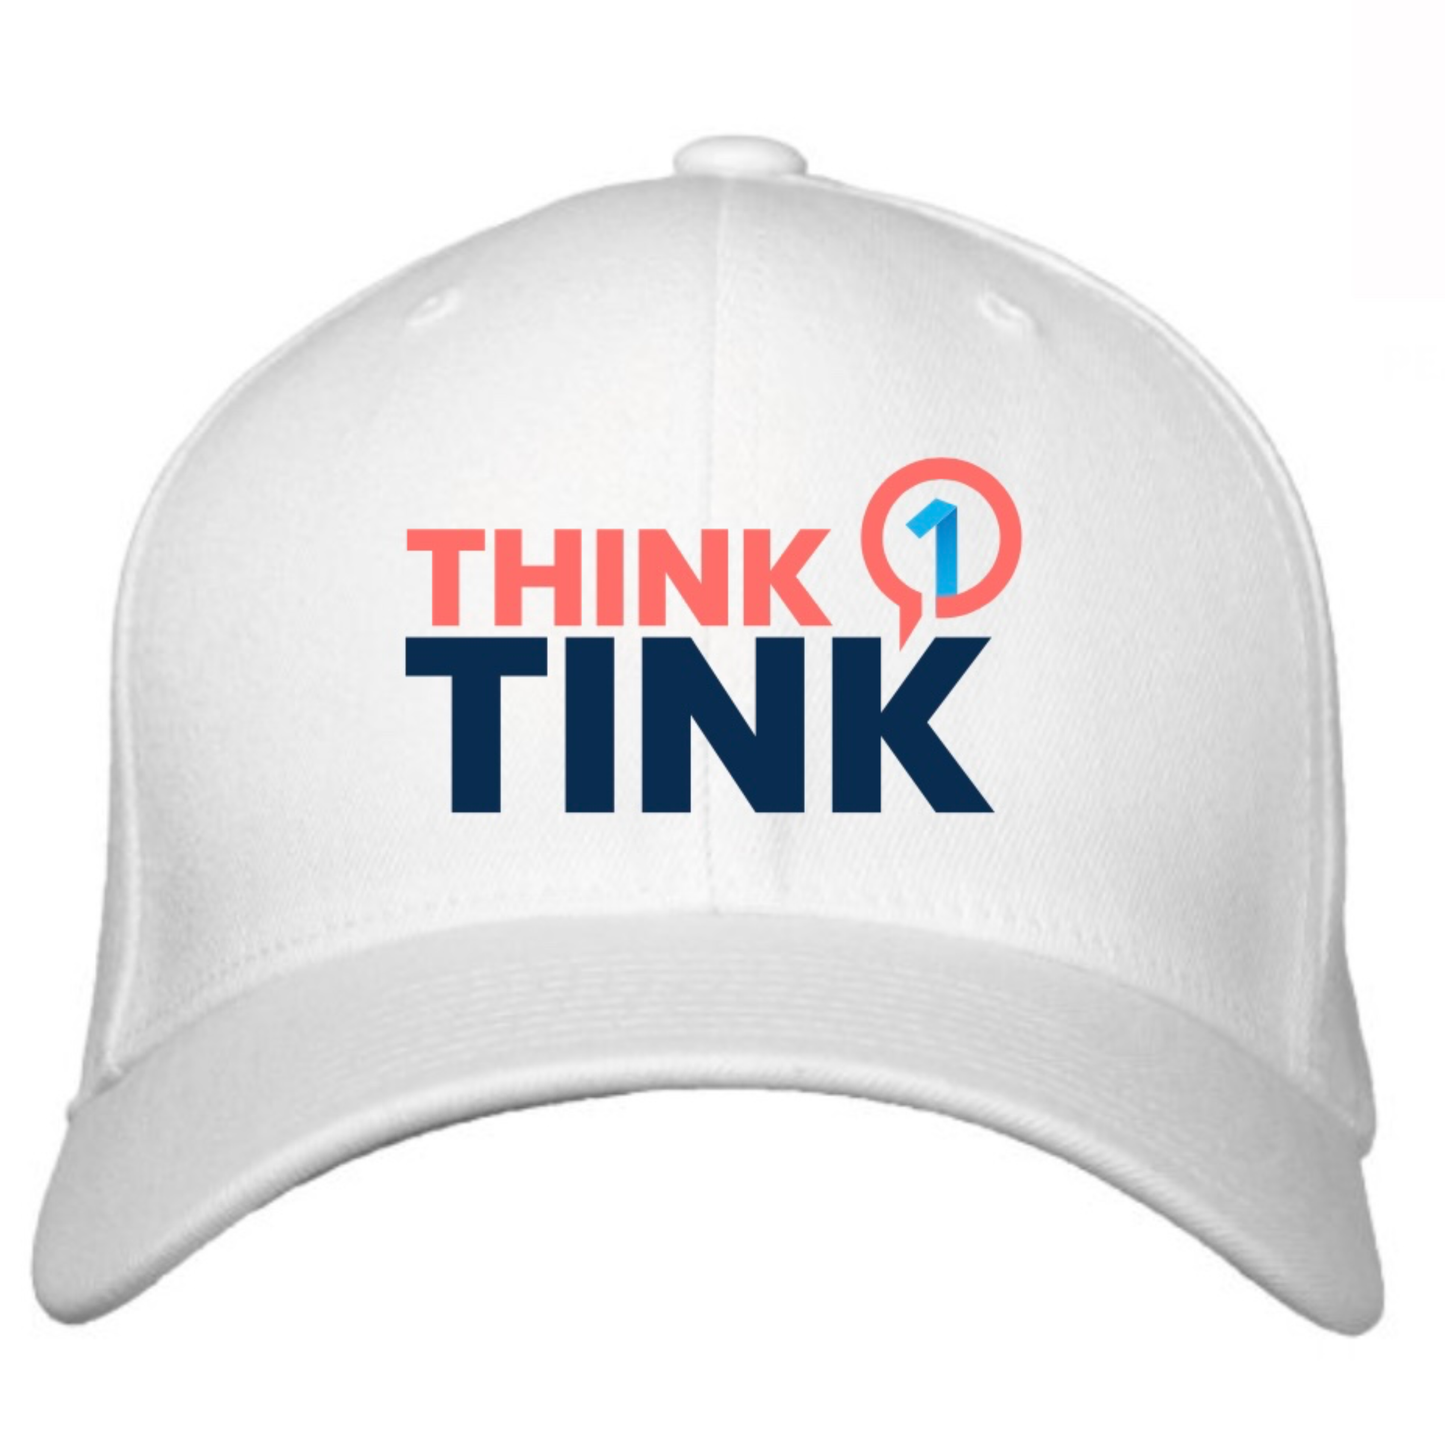 Think Tink Caps